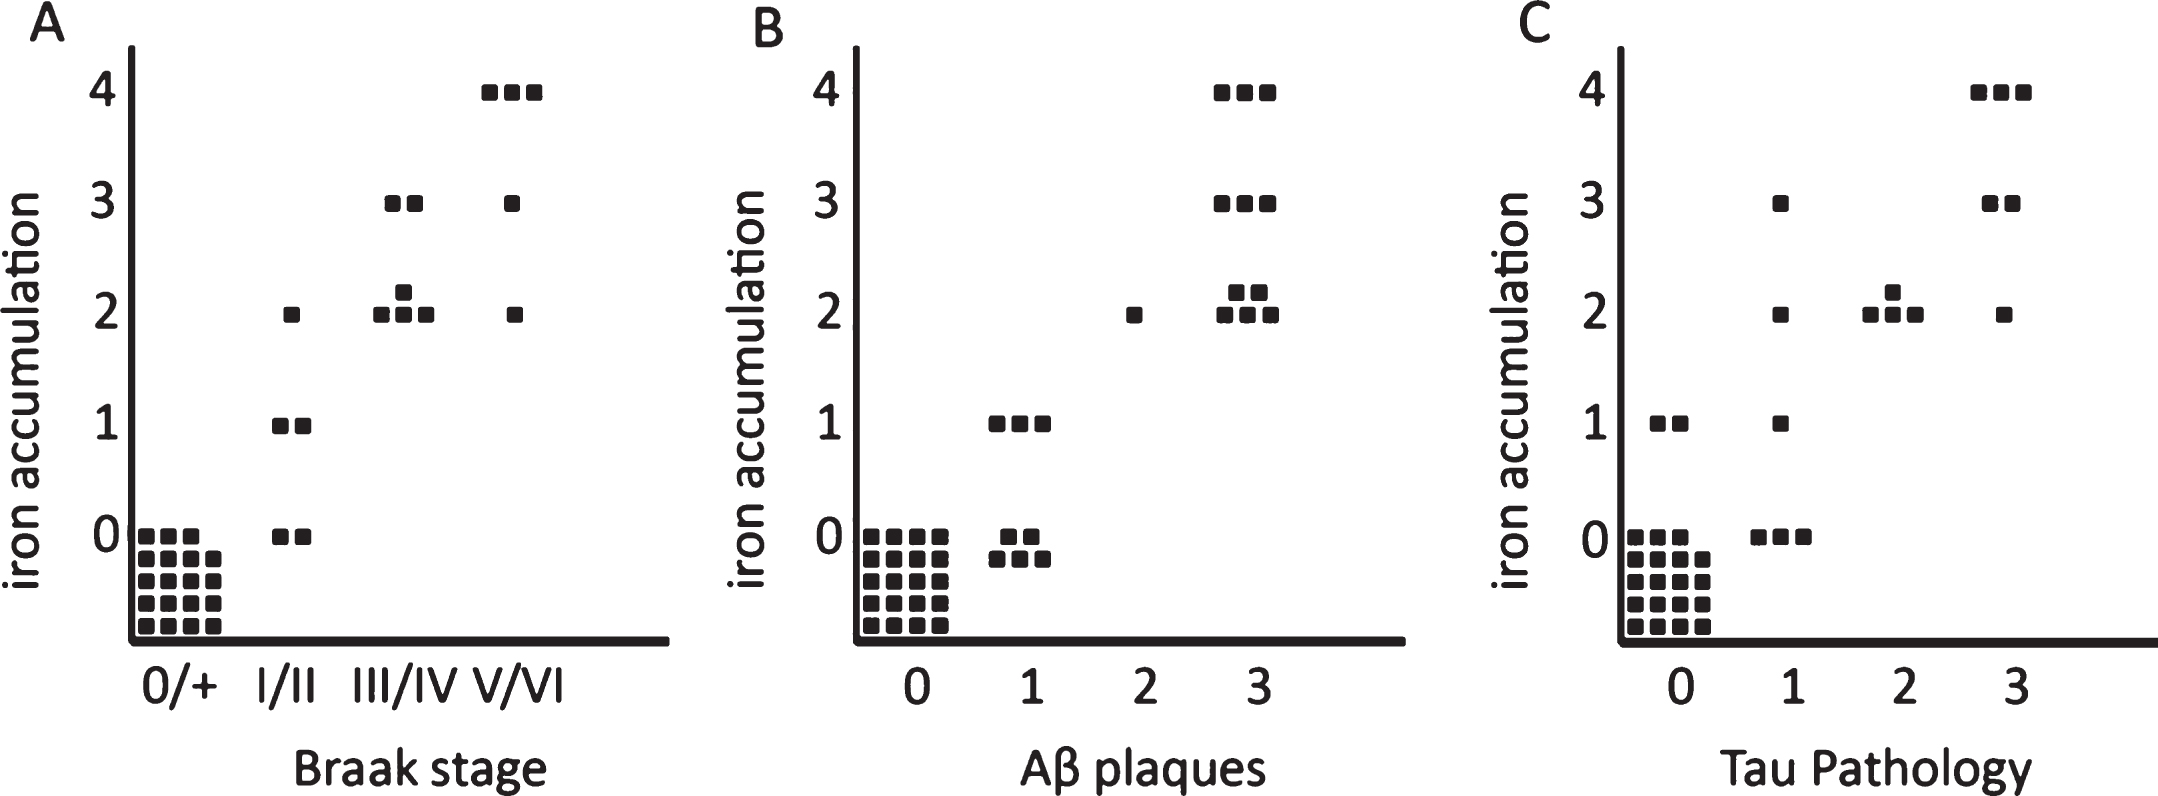 Semi-quantitative correlation between iron accumulation and Braak stage (A), Aβ plaques (B), and tau pathology (C). Iron accumulation: 0: no iron accumulation, 1: low, 2: intermediate and 3: high iron accumulation in plaques and microglia, 4: high iron accumulation in plaques and microglia and a band shaped iron/PLP increase in the middle cortical layers. For grading definitions, see Methods. All three correlations were statistically significant (p < 0.001).